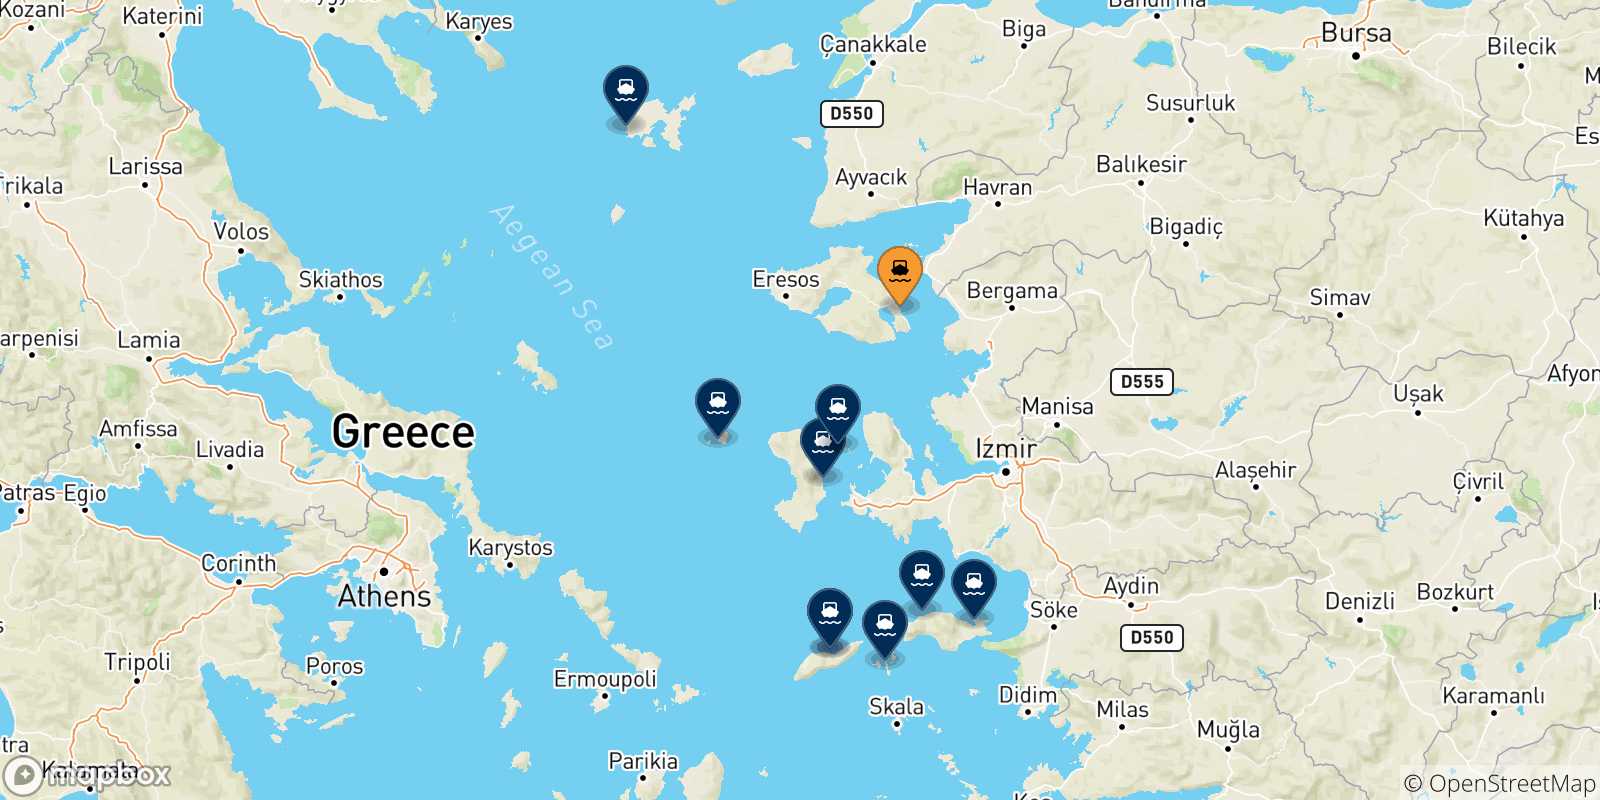 Map of the possible routes between Mytilene (Lesvos) and Aegean Islands